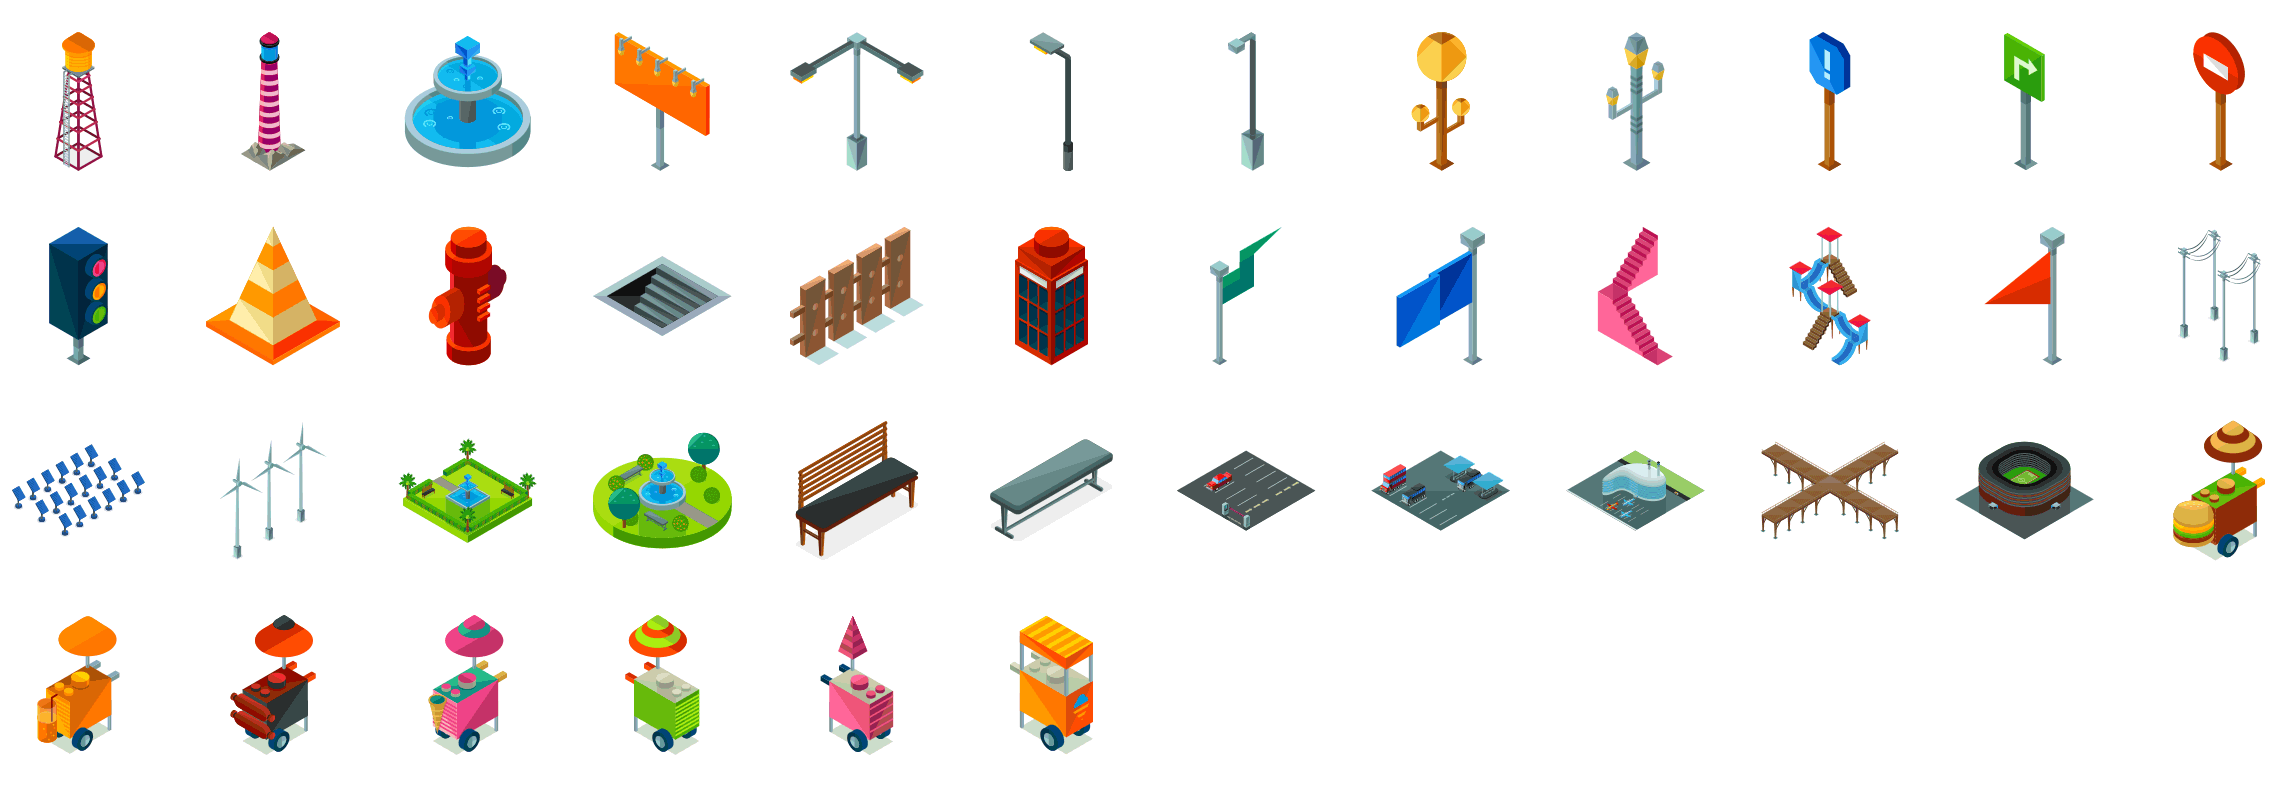 street-elements-isometric-icons-preview